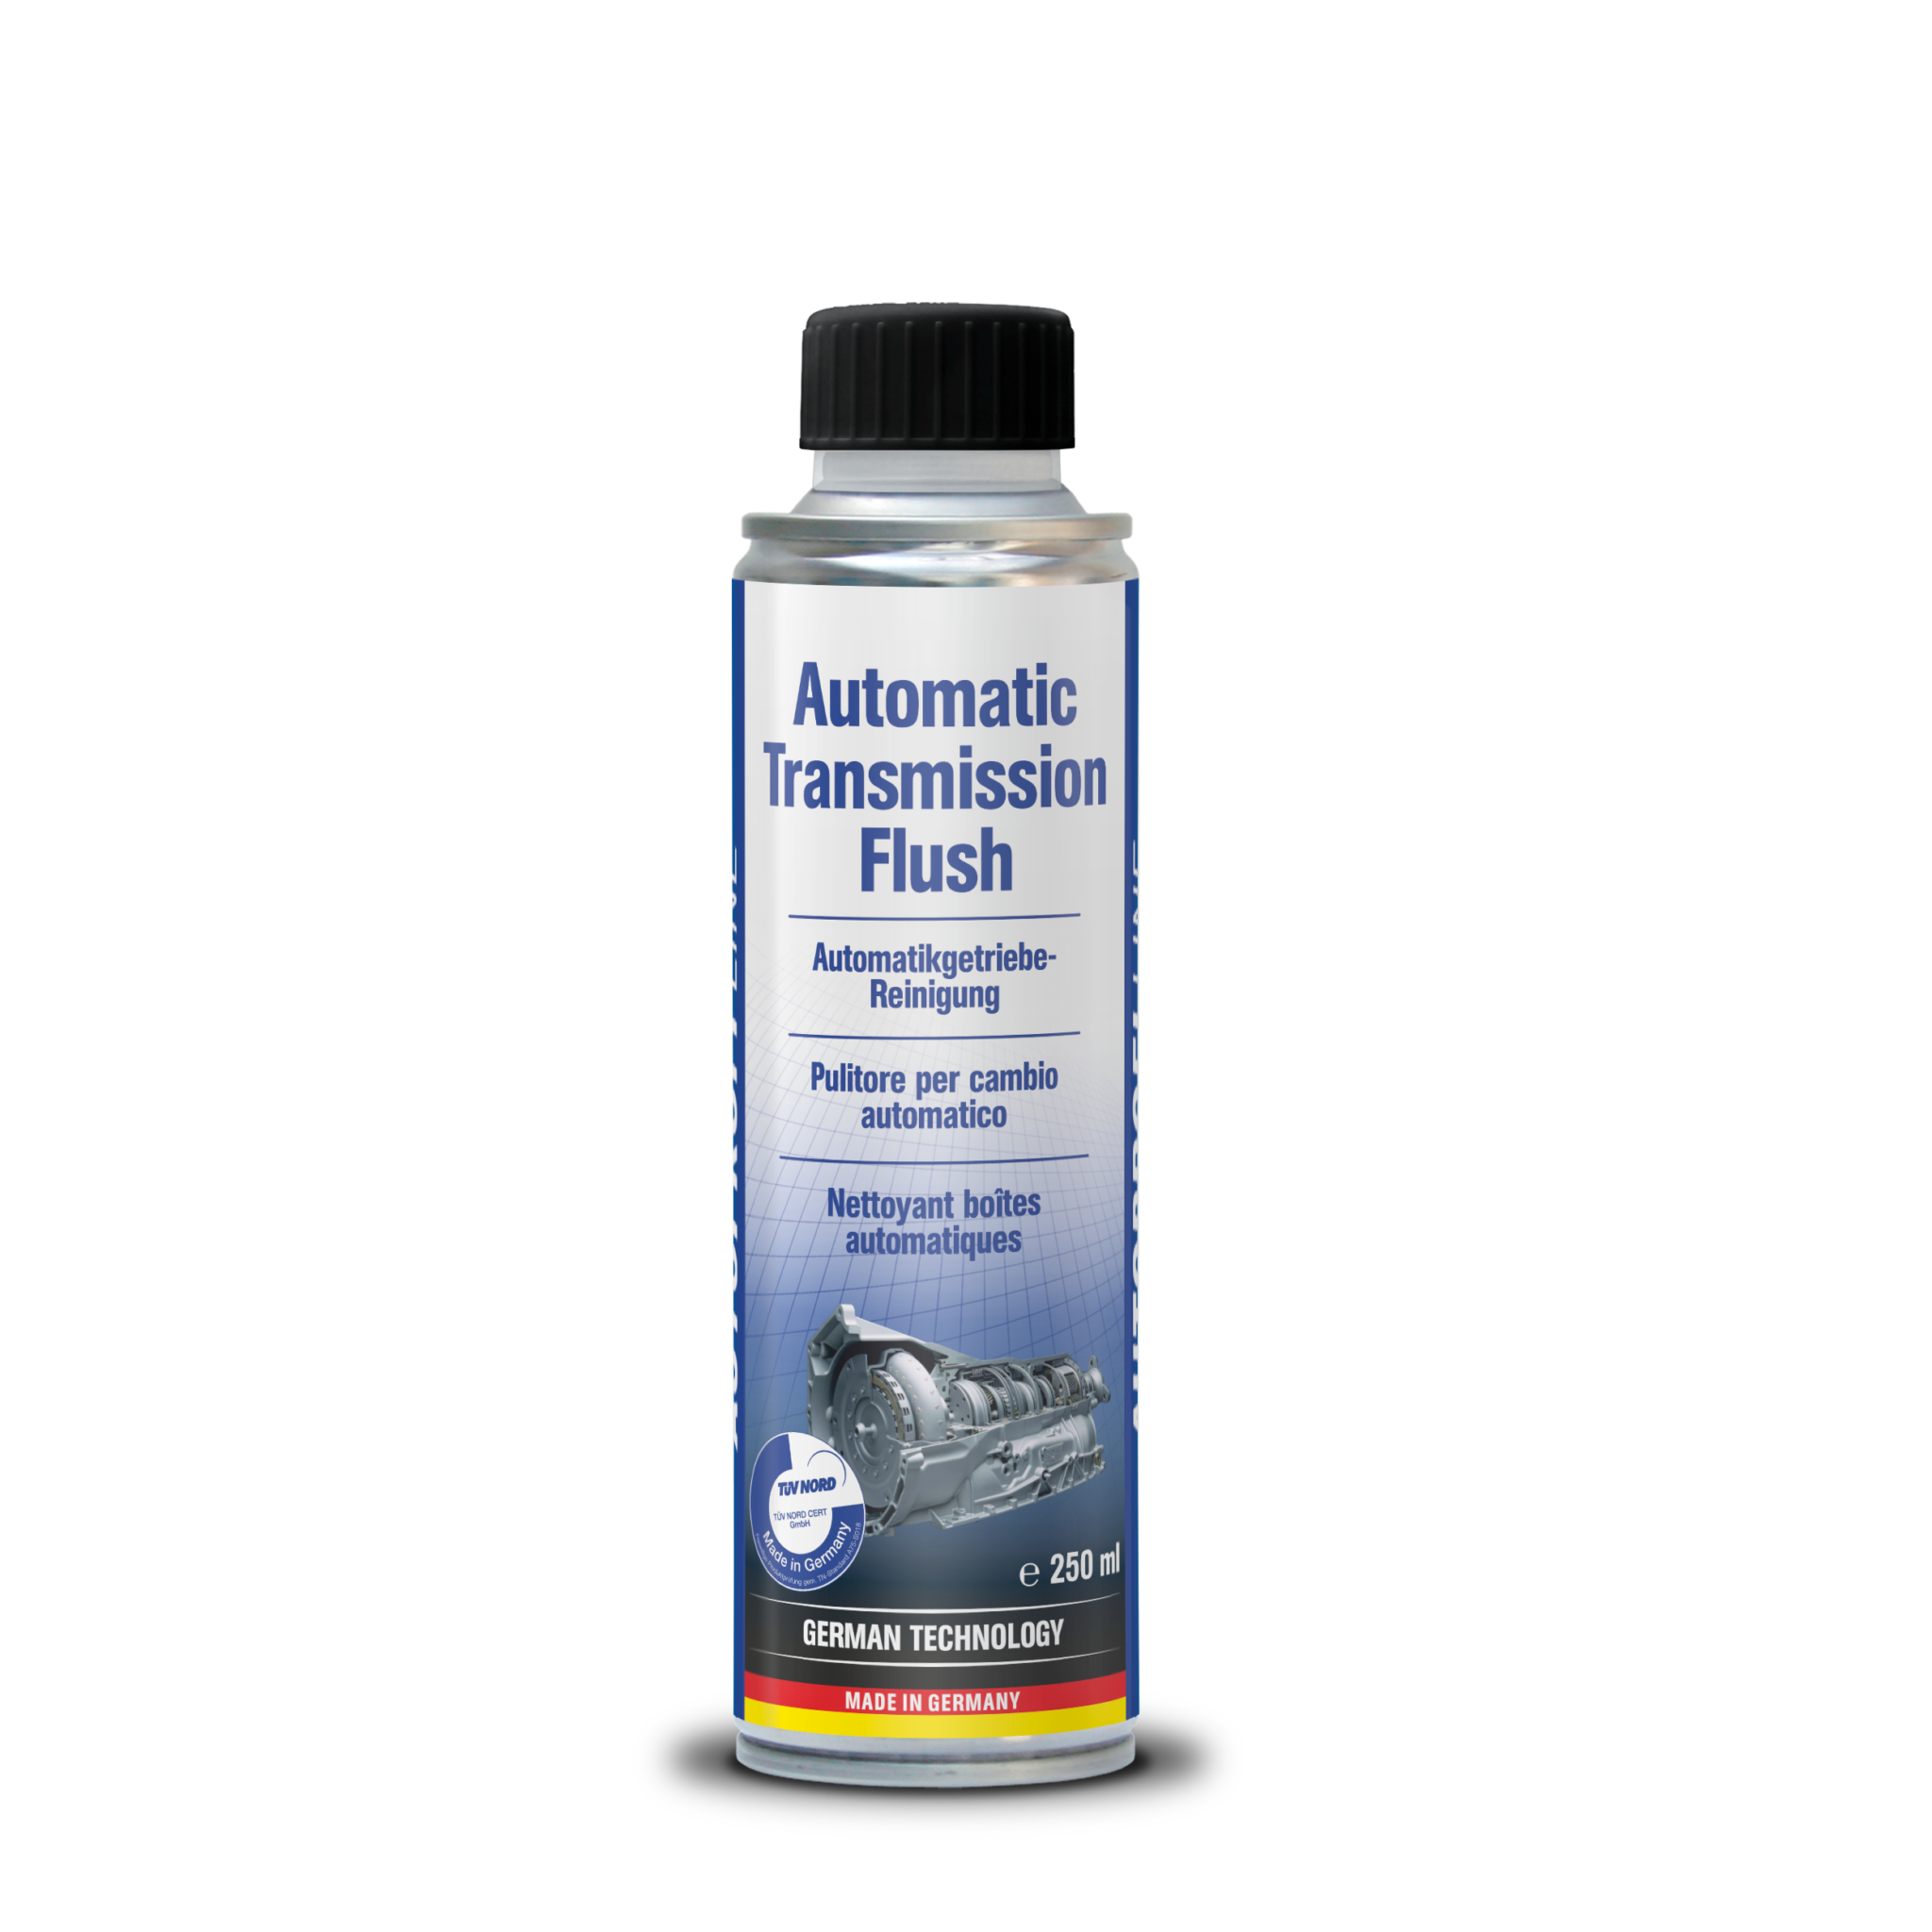 https://www.bluechemgroup.com/wp-content/uploads/2022/03/ATF.AP_43235_AutomaticTransmissionFlush_250ML_PIC_1.png